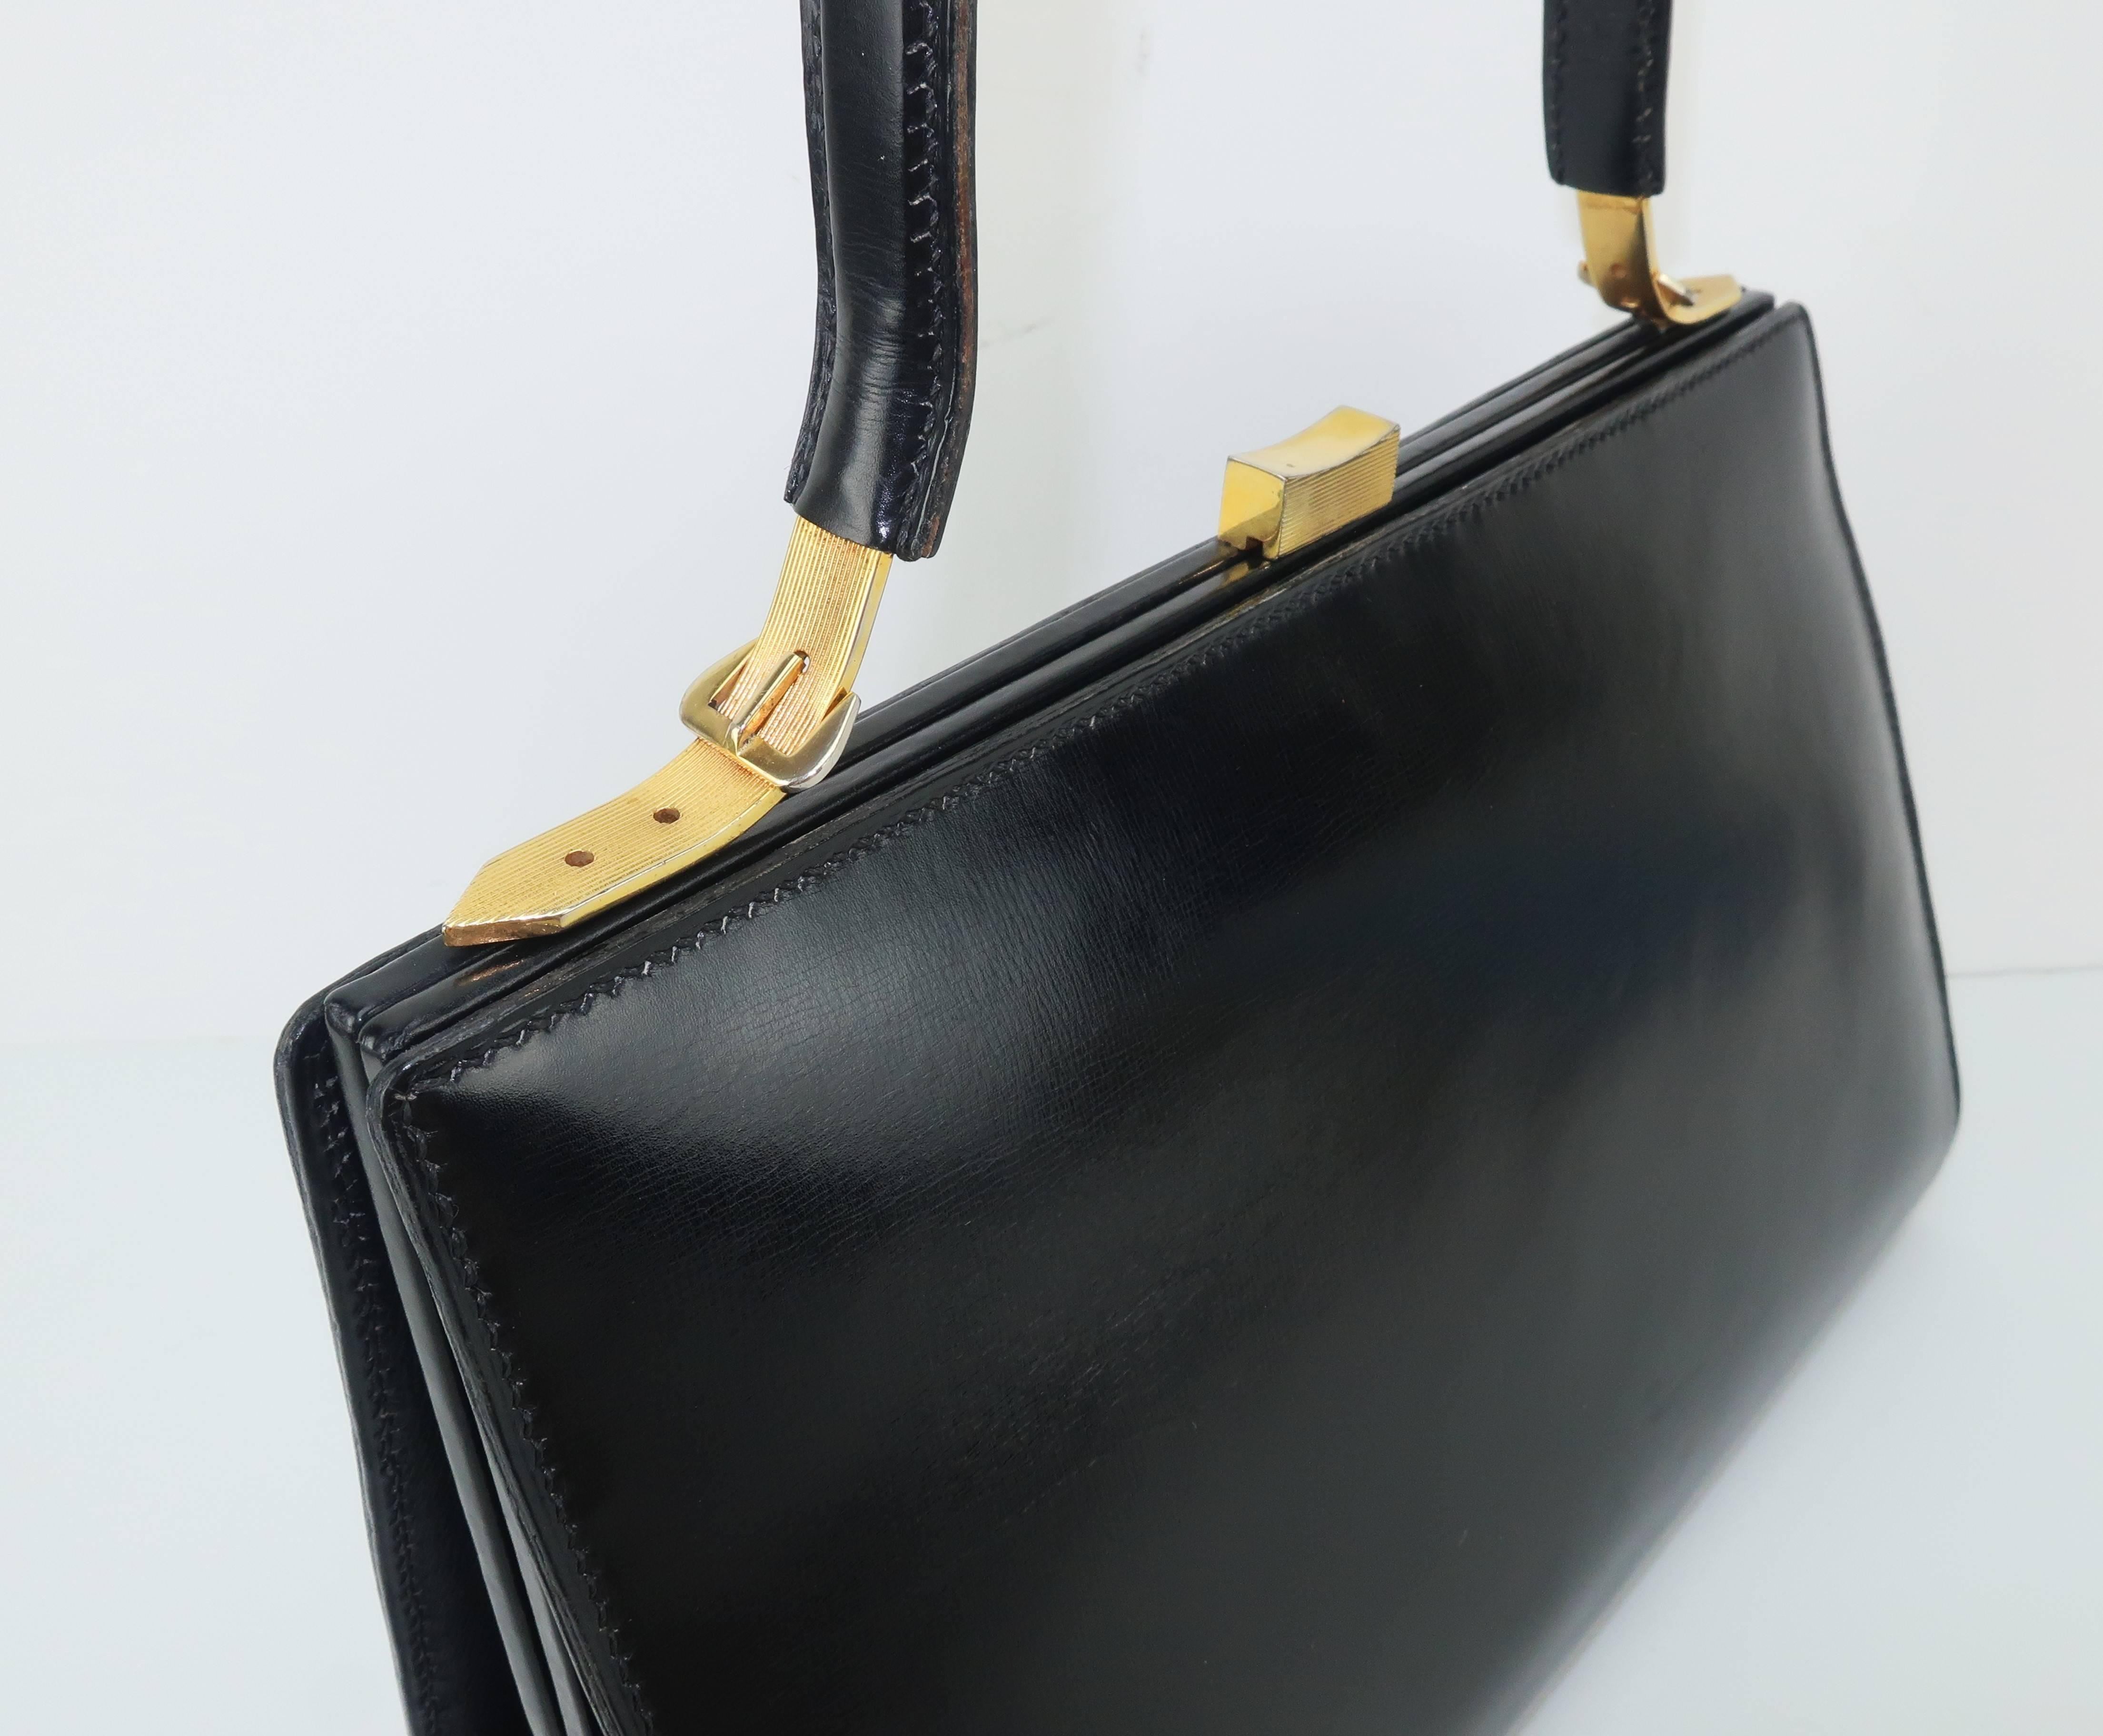 Lancel has been producing handbags in Paris, France since the late 1800’s ... always with an eye for the needs and desires of an independent and modern woman.  This classic 1950’s black leather handbag has a unique profile with a right angle corner